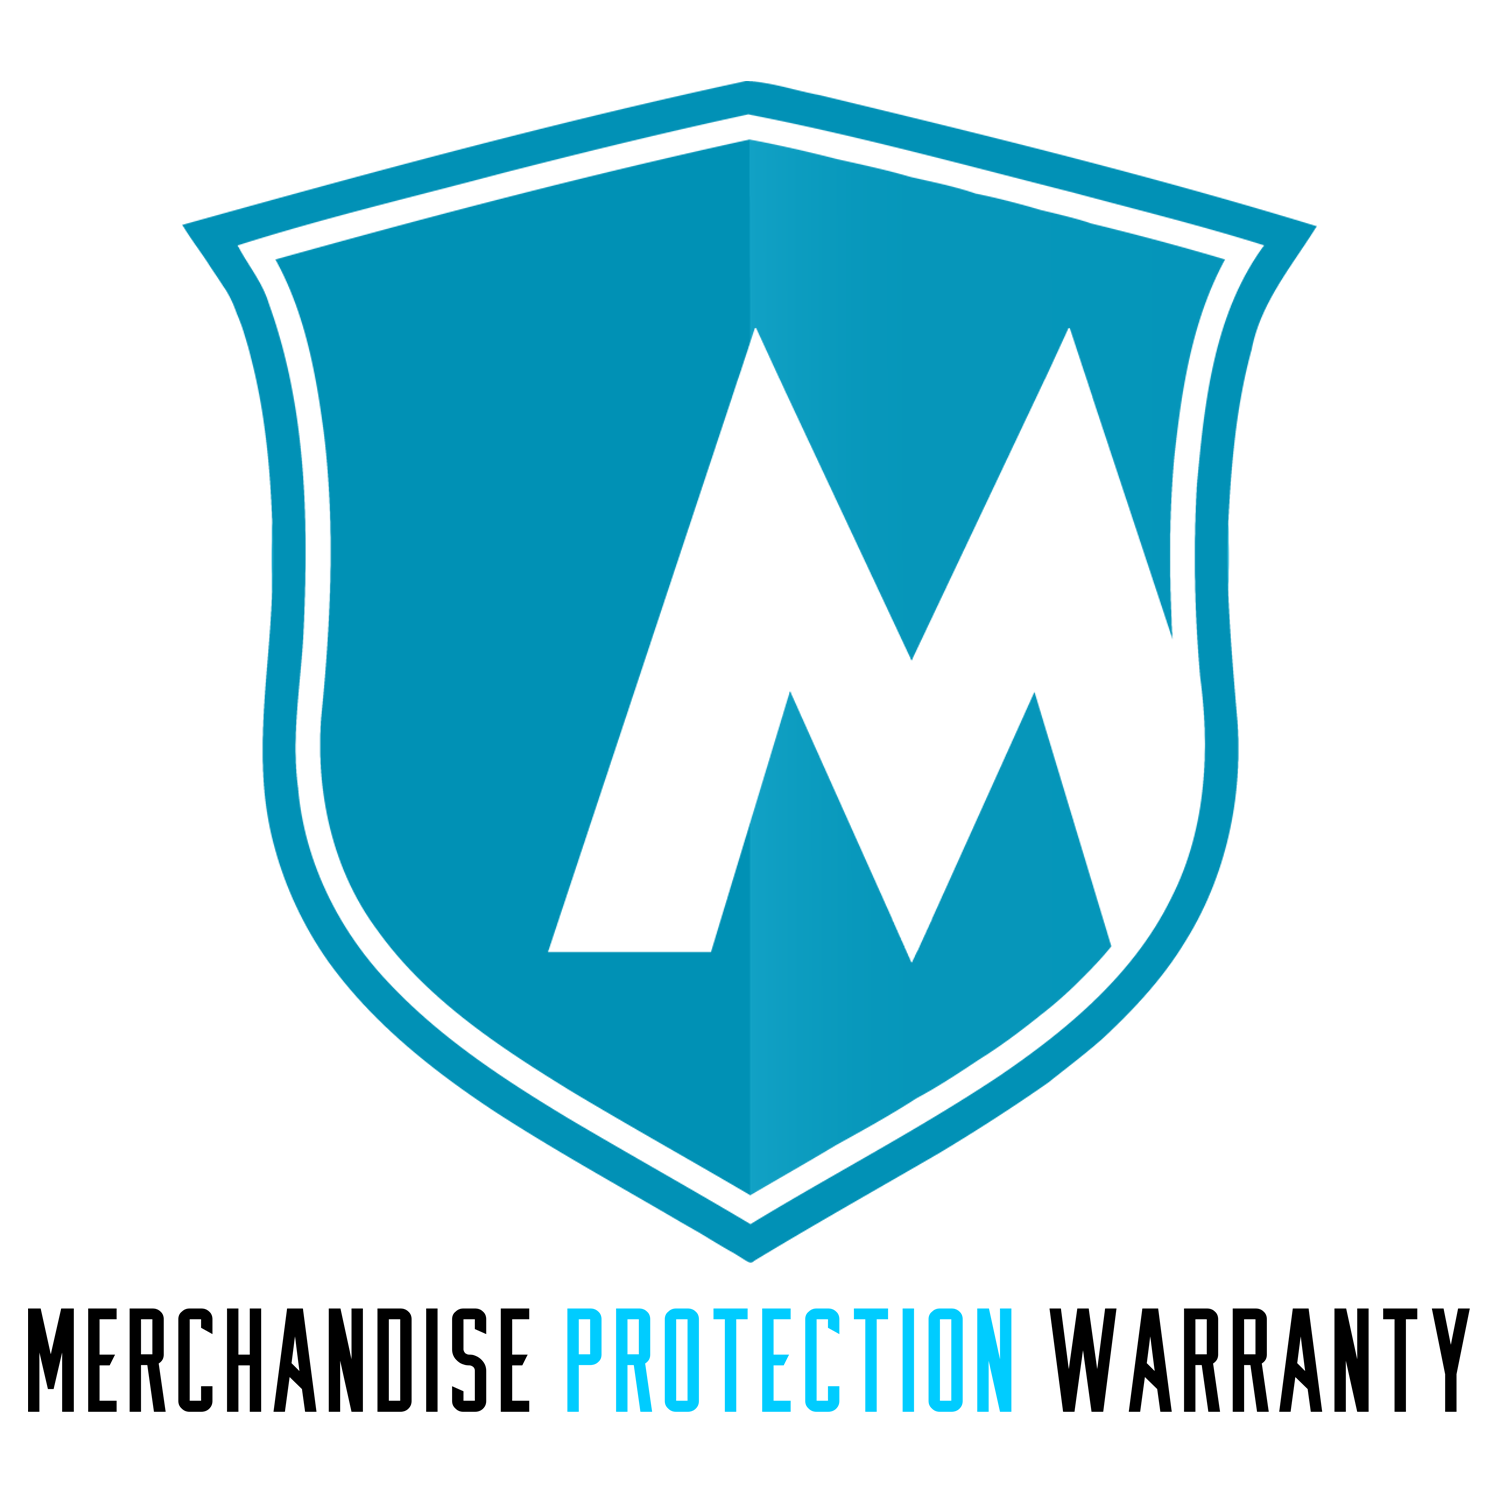 2 Year Merchandise Protection Warranty under $250 (Accidental, Prepaid Shipping)